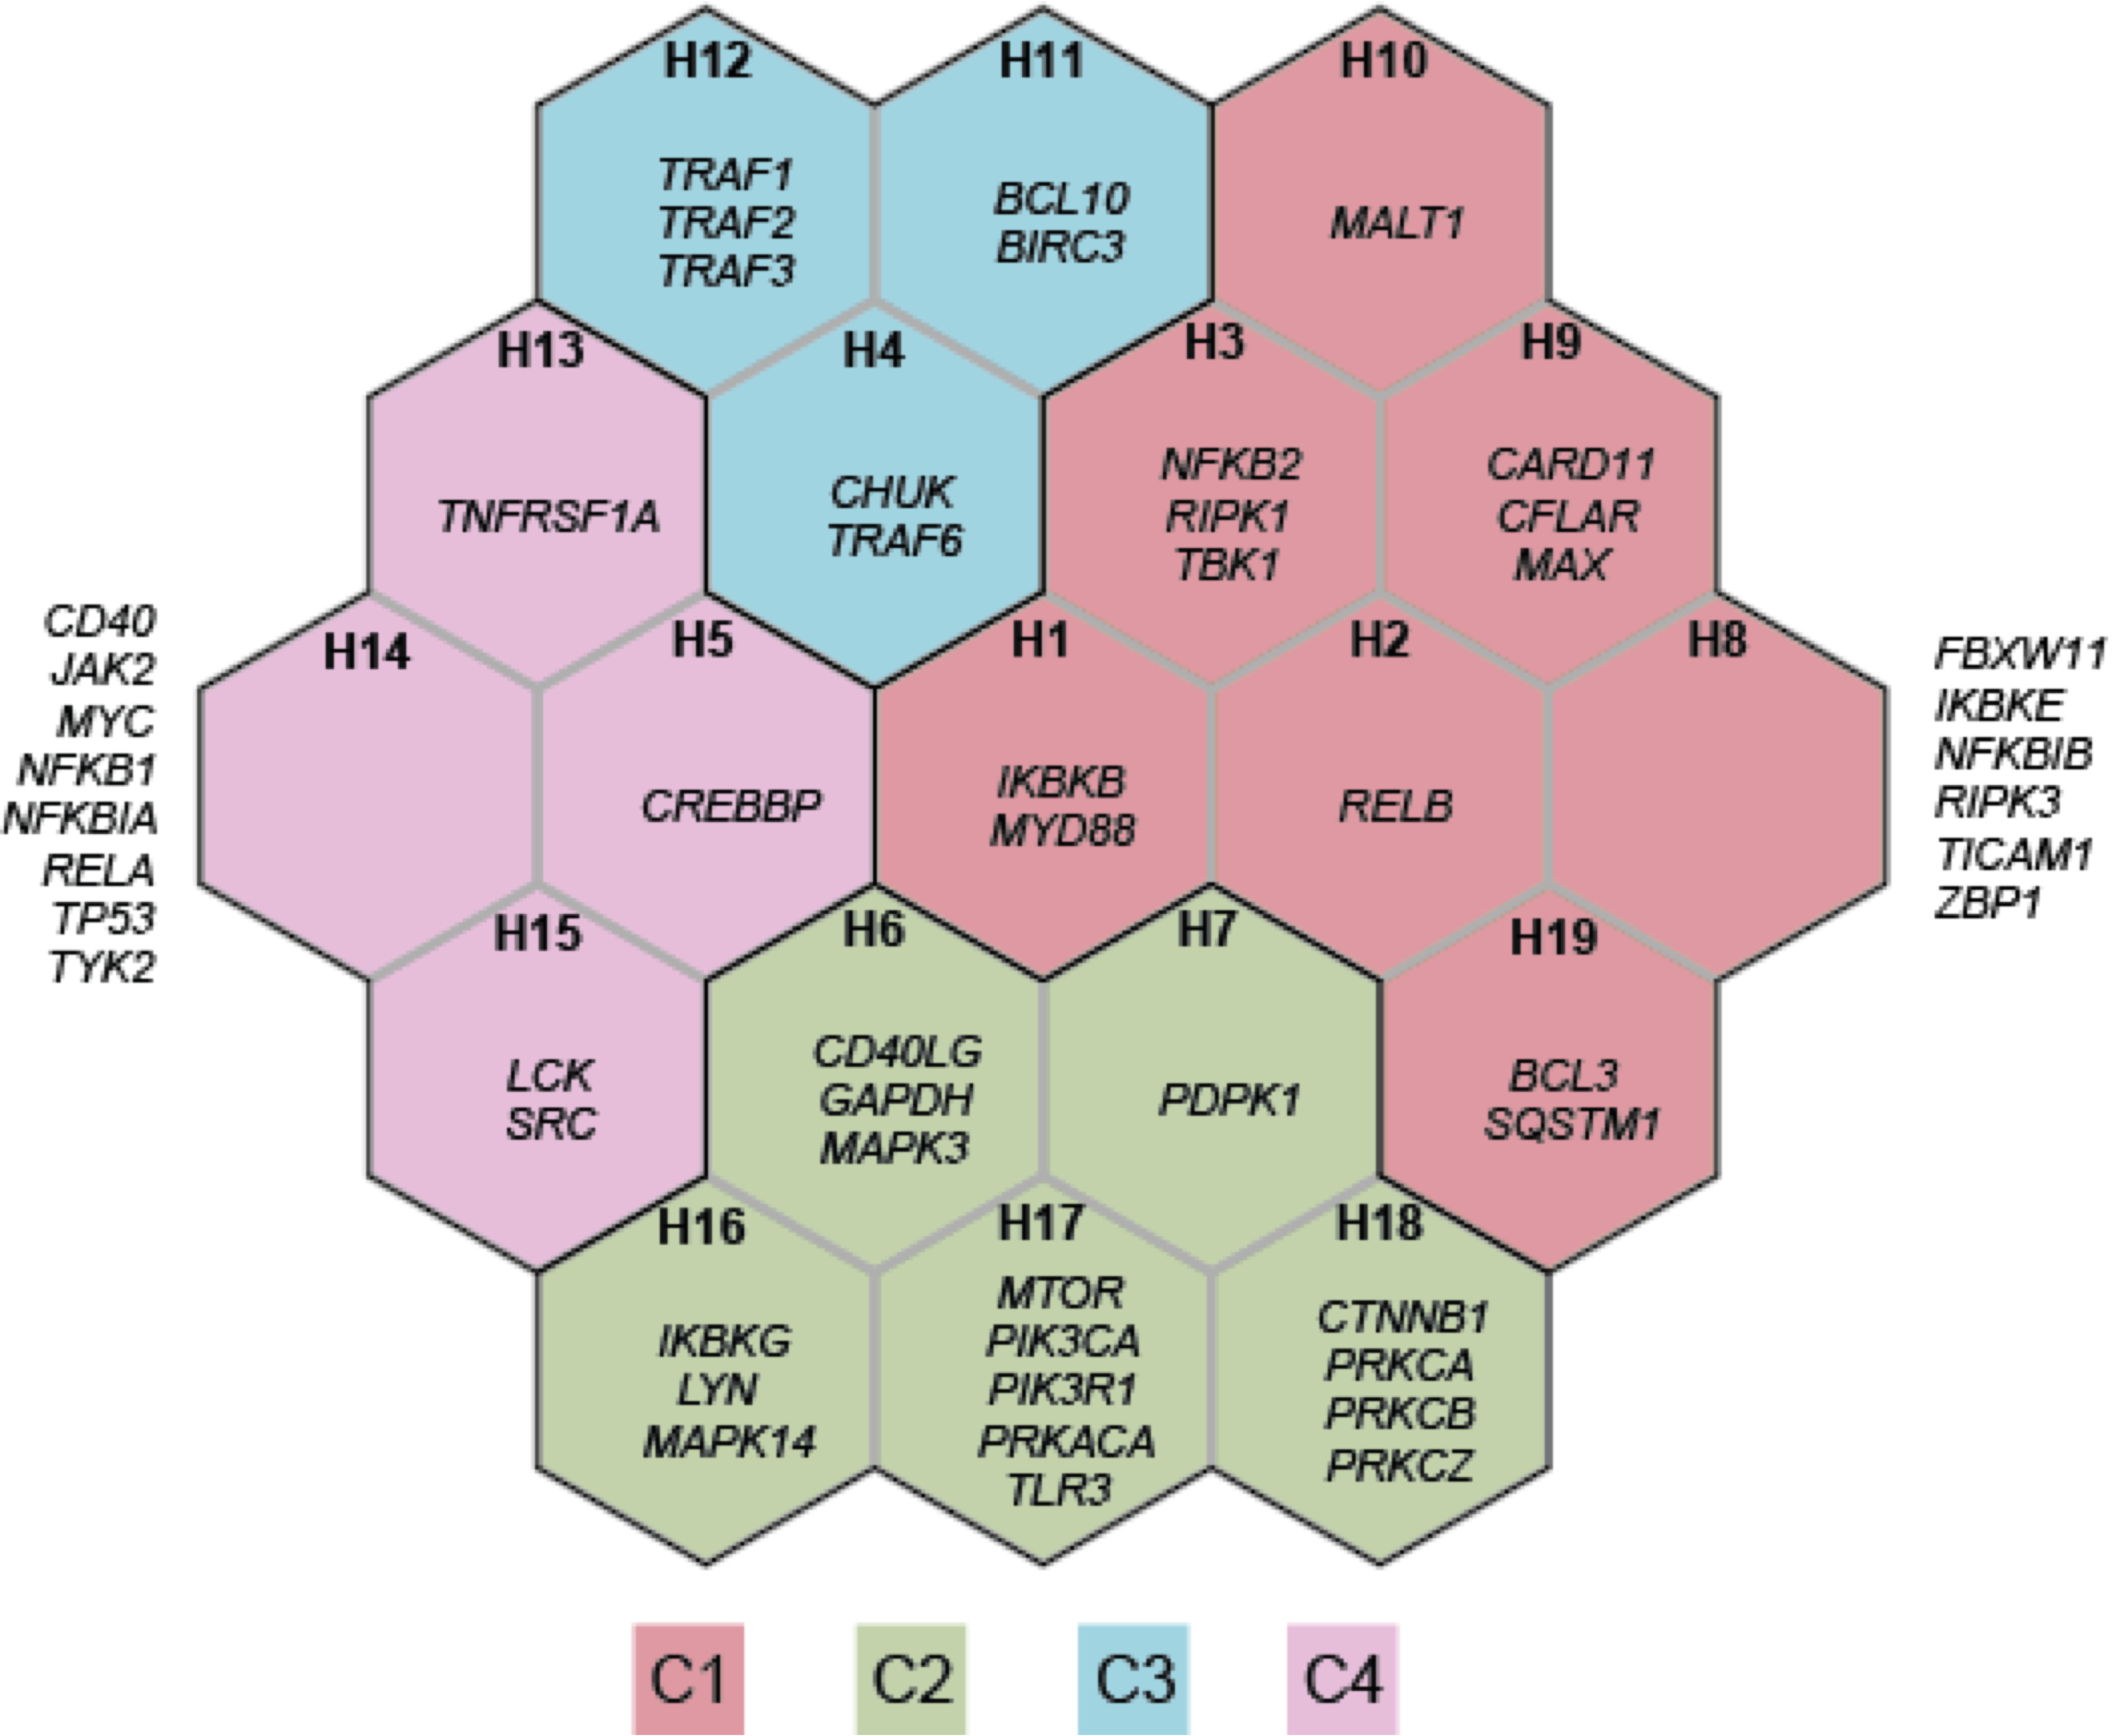 Comparisons using the supra-hexagonal map. This map was learned from the prioritisation information of 53 crosstalk genes in kidney stone disease (KSD) and 8 immune-related traits. Each map illustrates a trait-specific crosstalk gene prioritisation profile. Across traits, genes with similar prioritisation patterns are mapped onto the same or nearly position in the map. The outermost frame represents the landscape for the traits analysed, from which geometric locations of traits delineate their relationships (by the similarity of prioritisation profiles between traits). AS: Ankylosing Spondylitis; CRO: Crohn's Disease; MS: Multiple Sclerosis; PSO: Psoriasis; RA: Rheumatoid Arthritis; SLE: Systemic Lupus Erythematosus; T1D: Type I Diabetes; UC: Ulcerative Colitis.